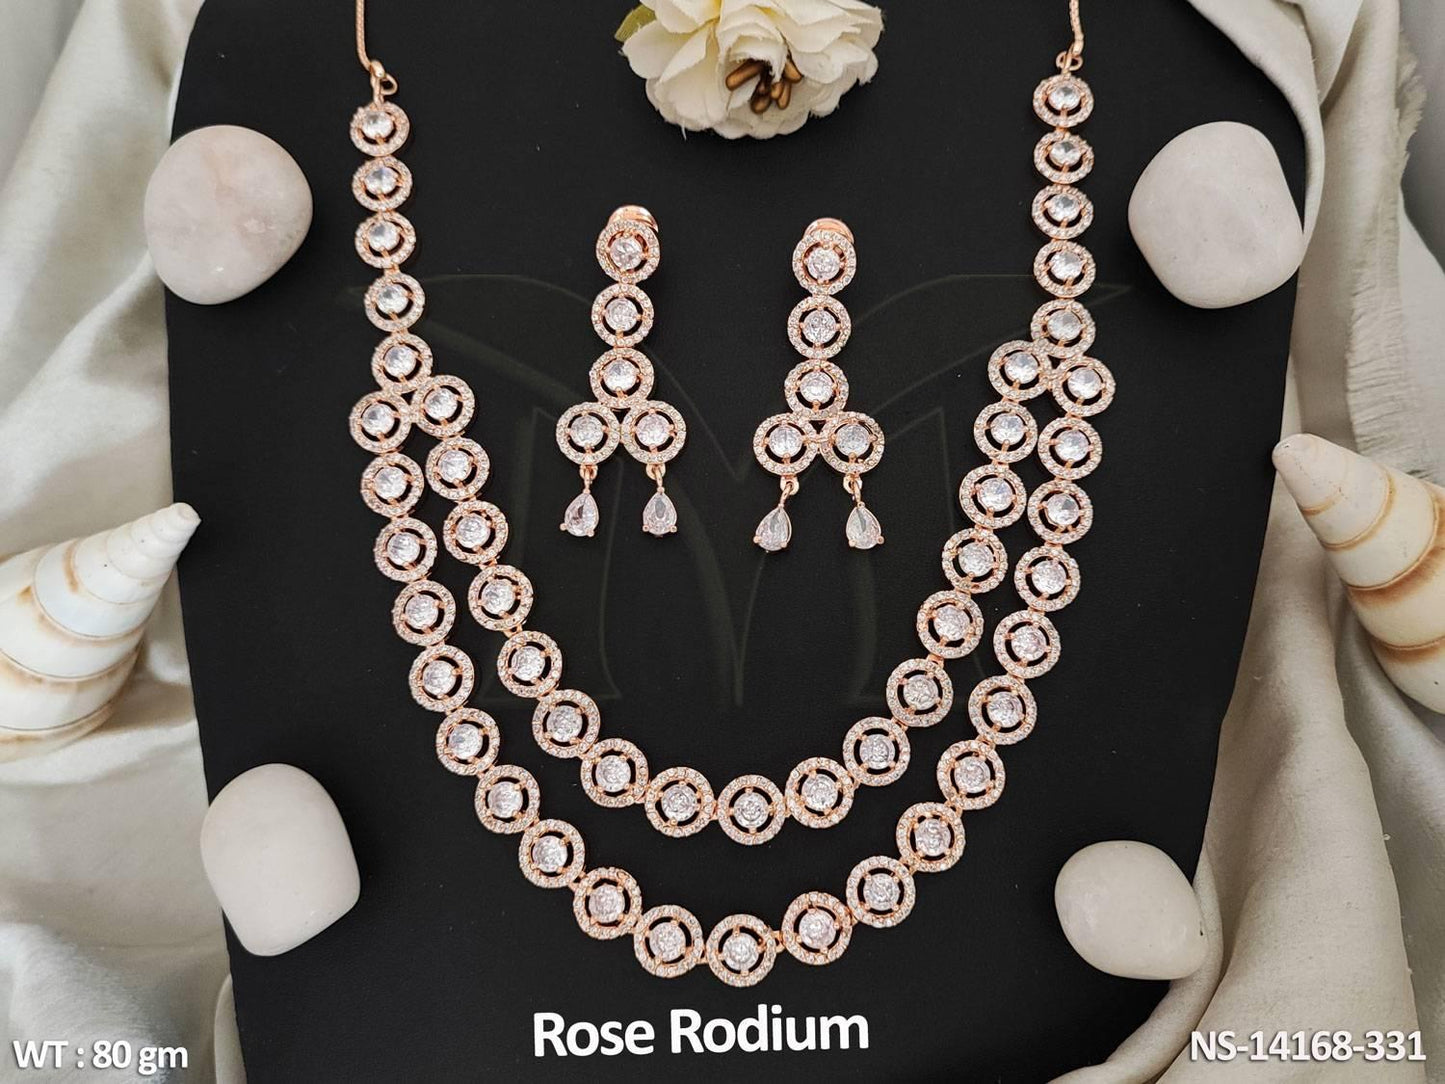 Exude elegance and sophistication with its beautiful design. Complete your look with this stunning set.